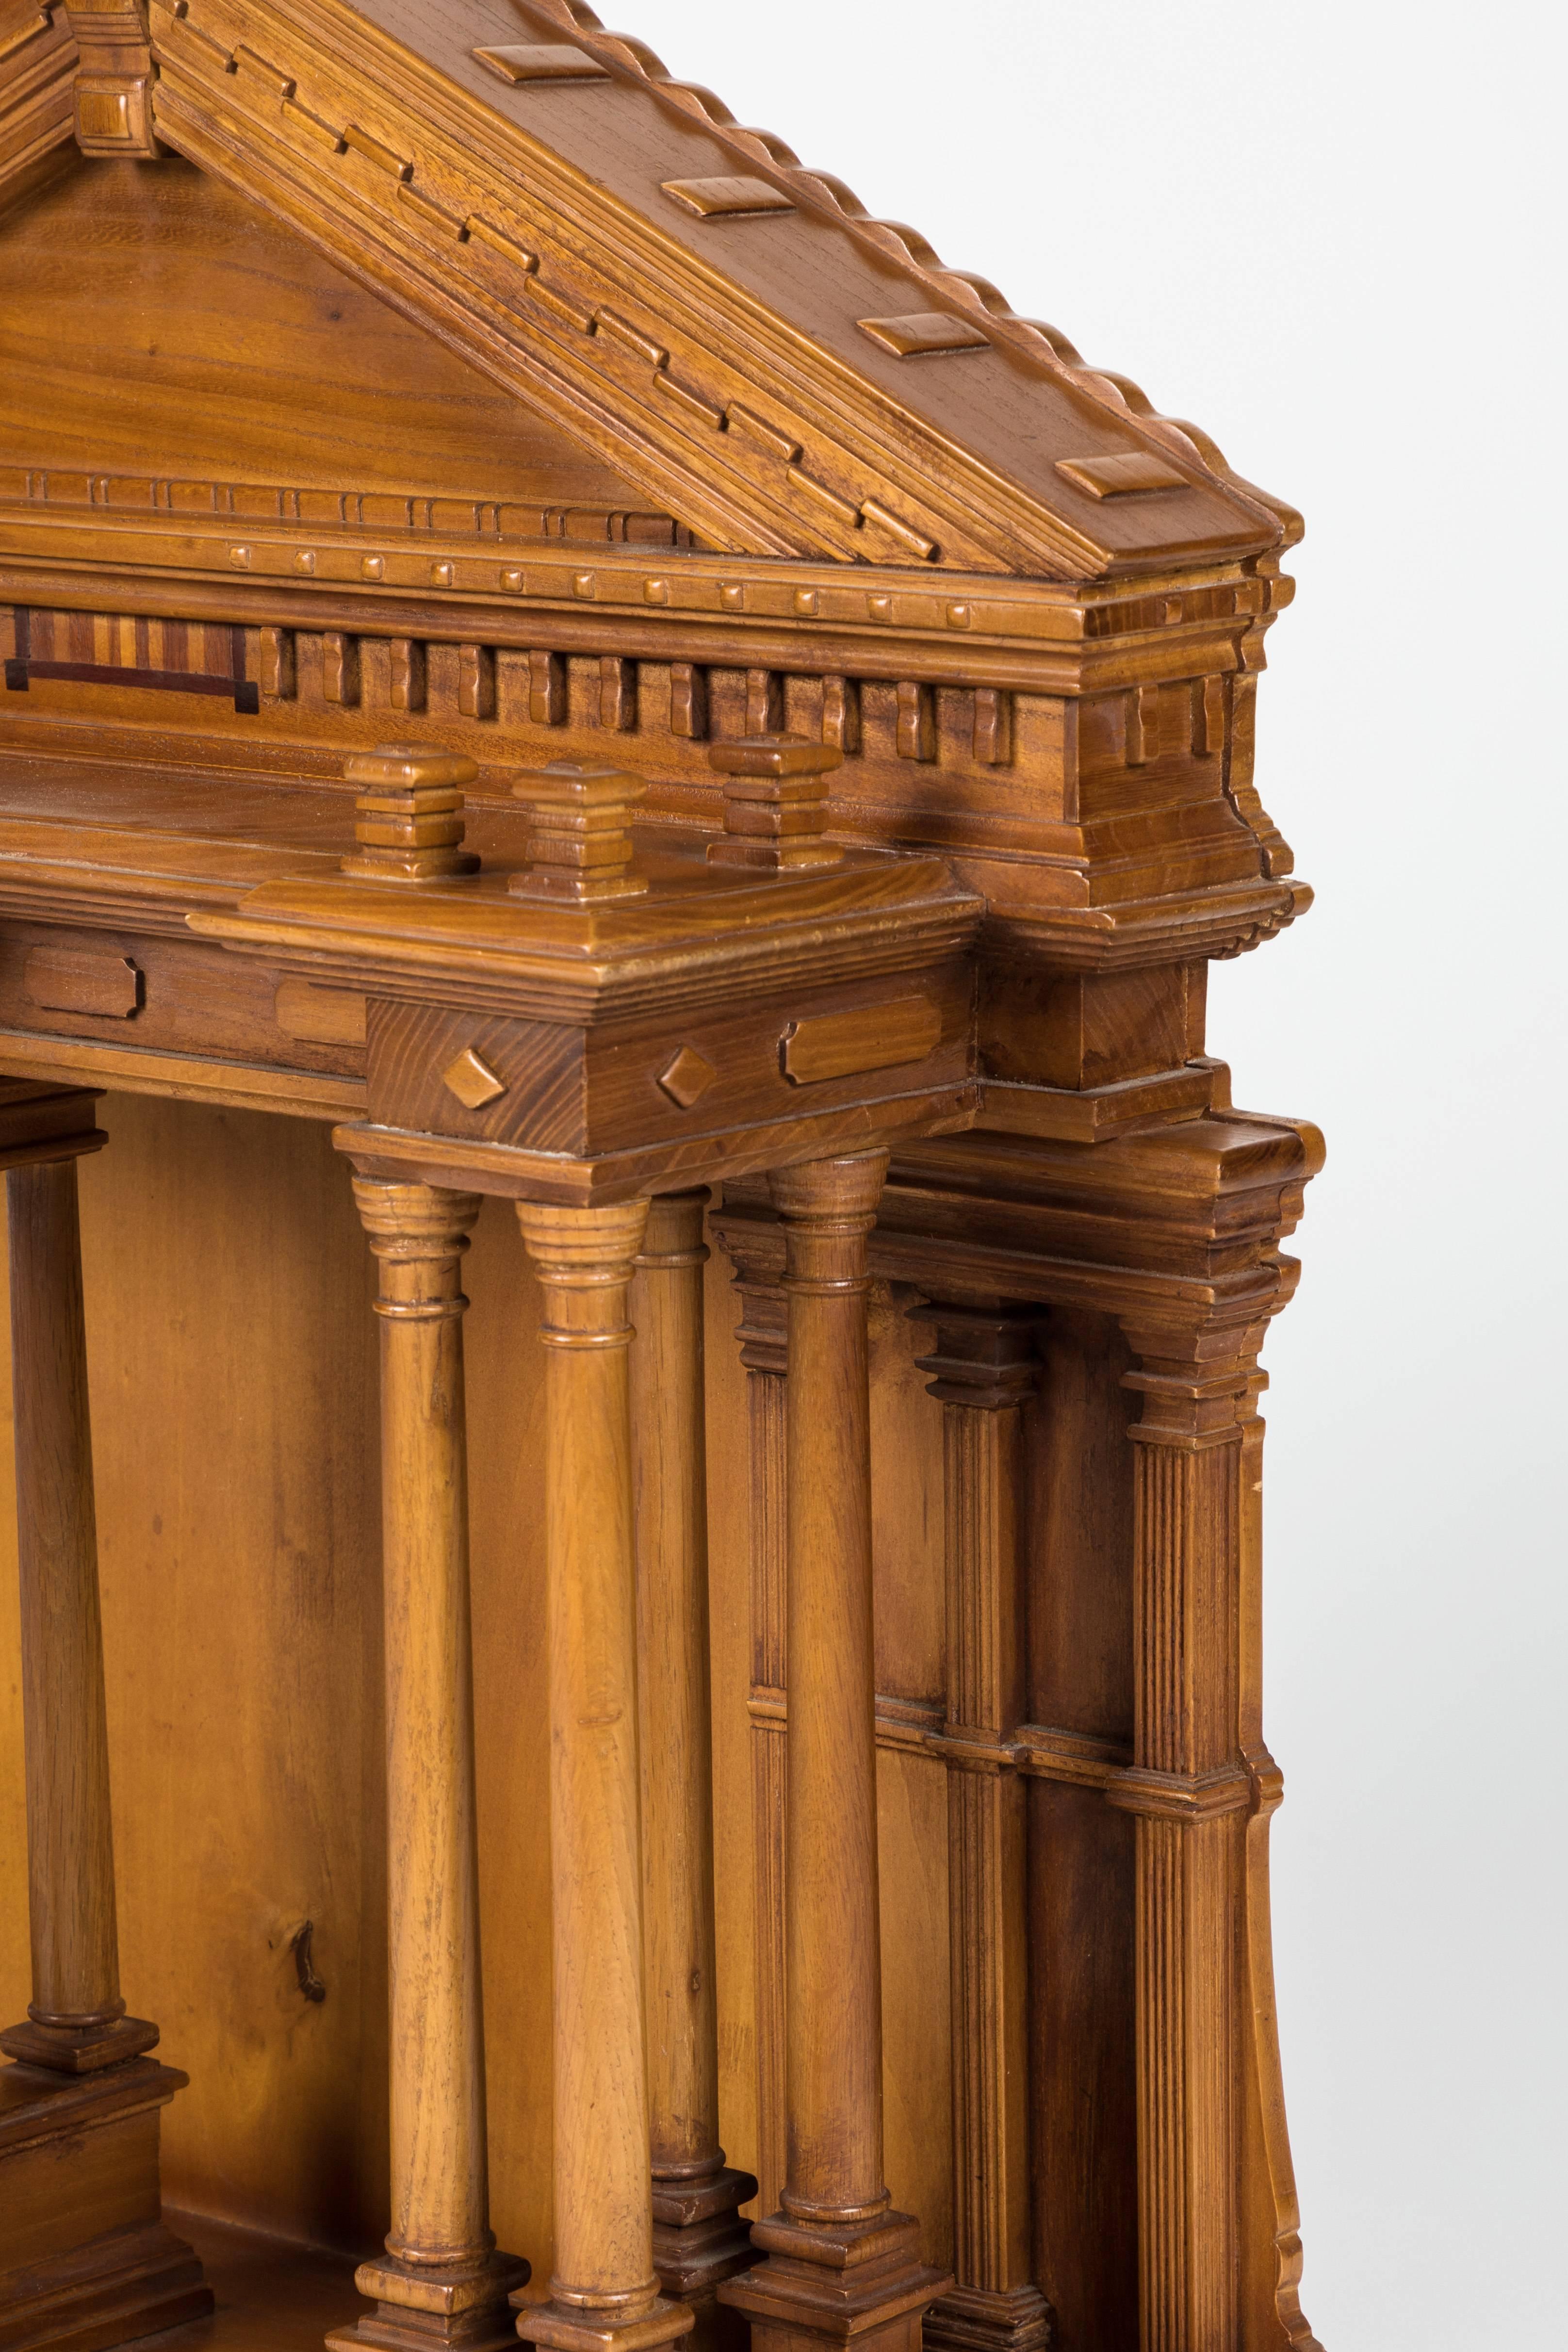 European Intricately Carved Wooden Model of the Greek Parthenon